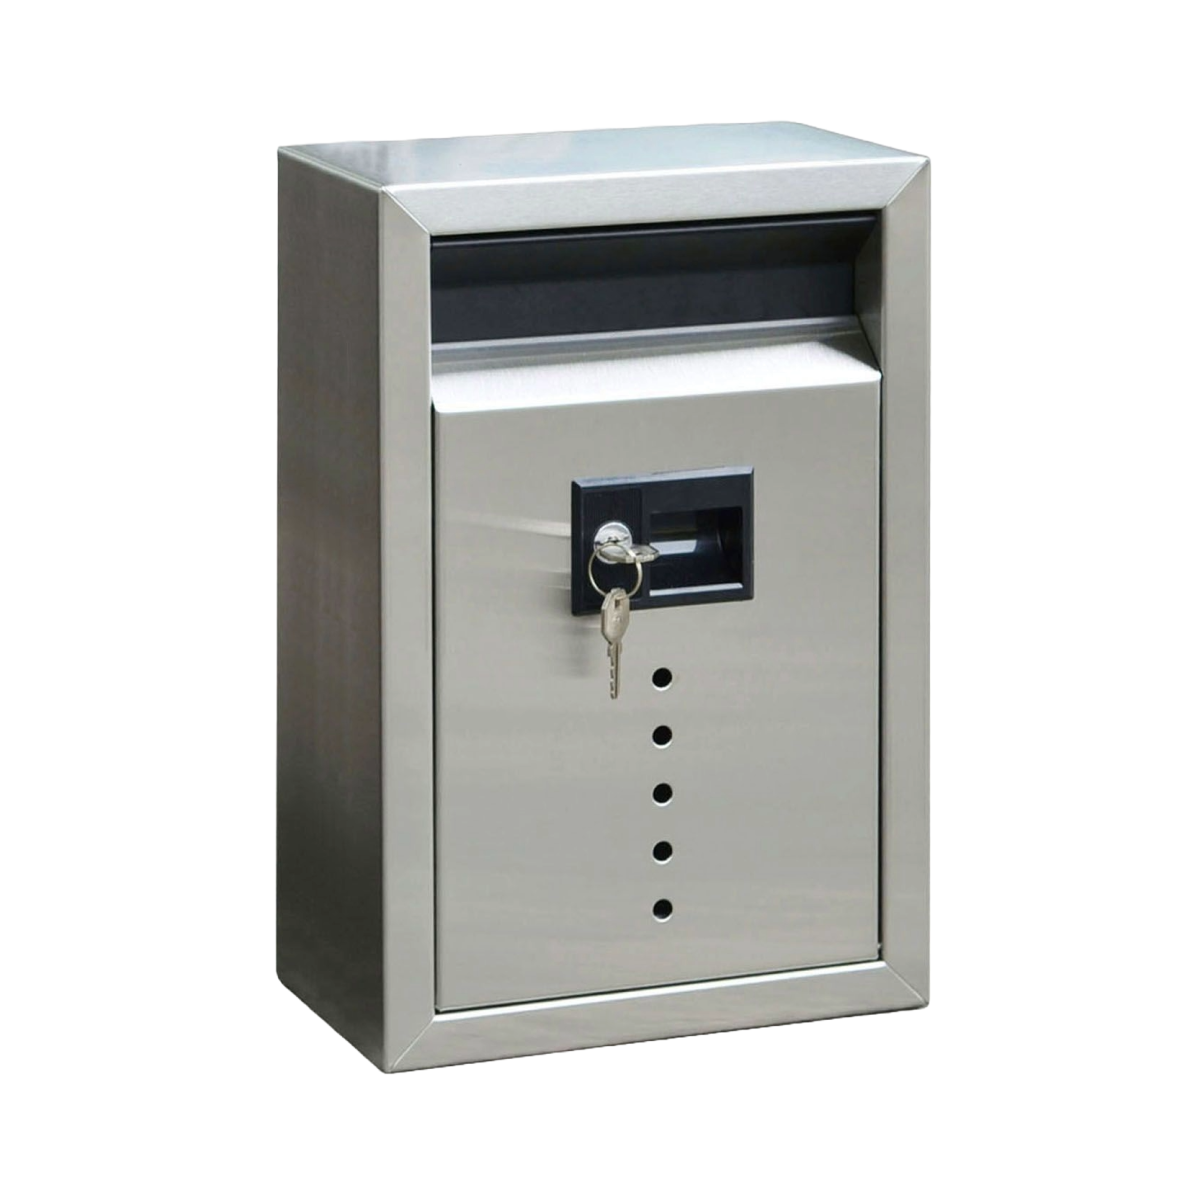 E9 Ecco Mailboxes – Large Mailbox Product Image